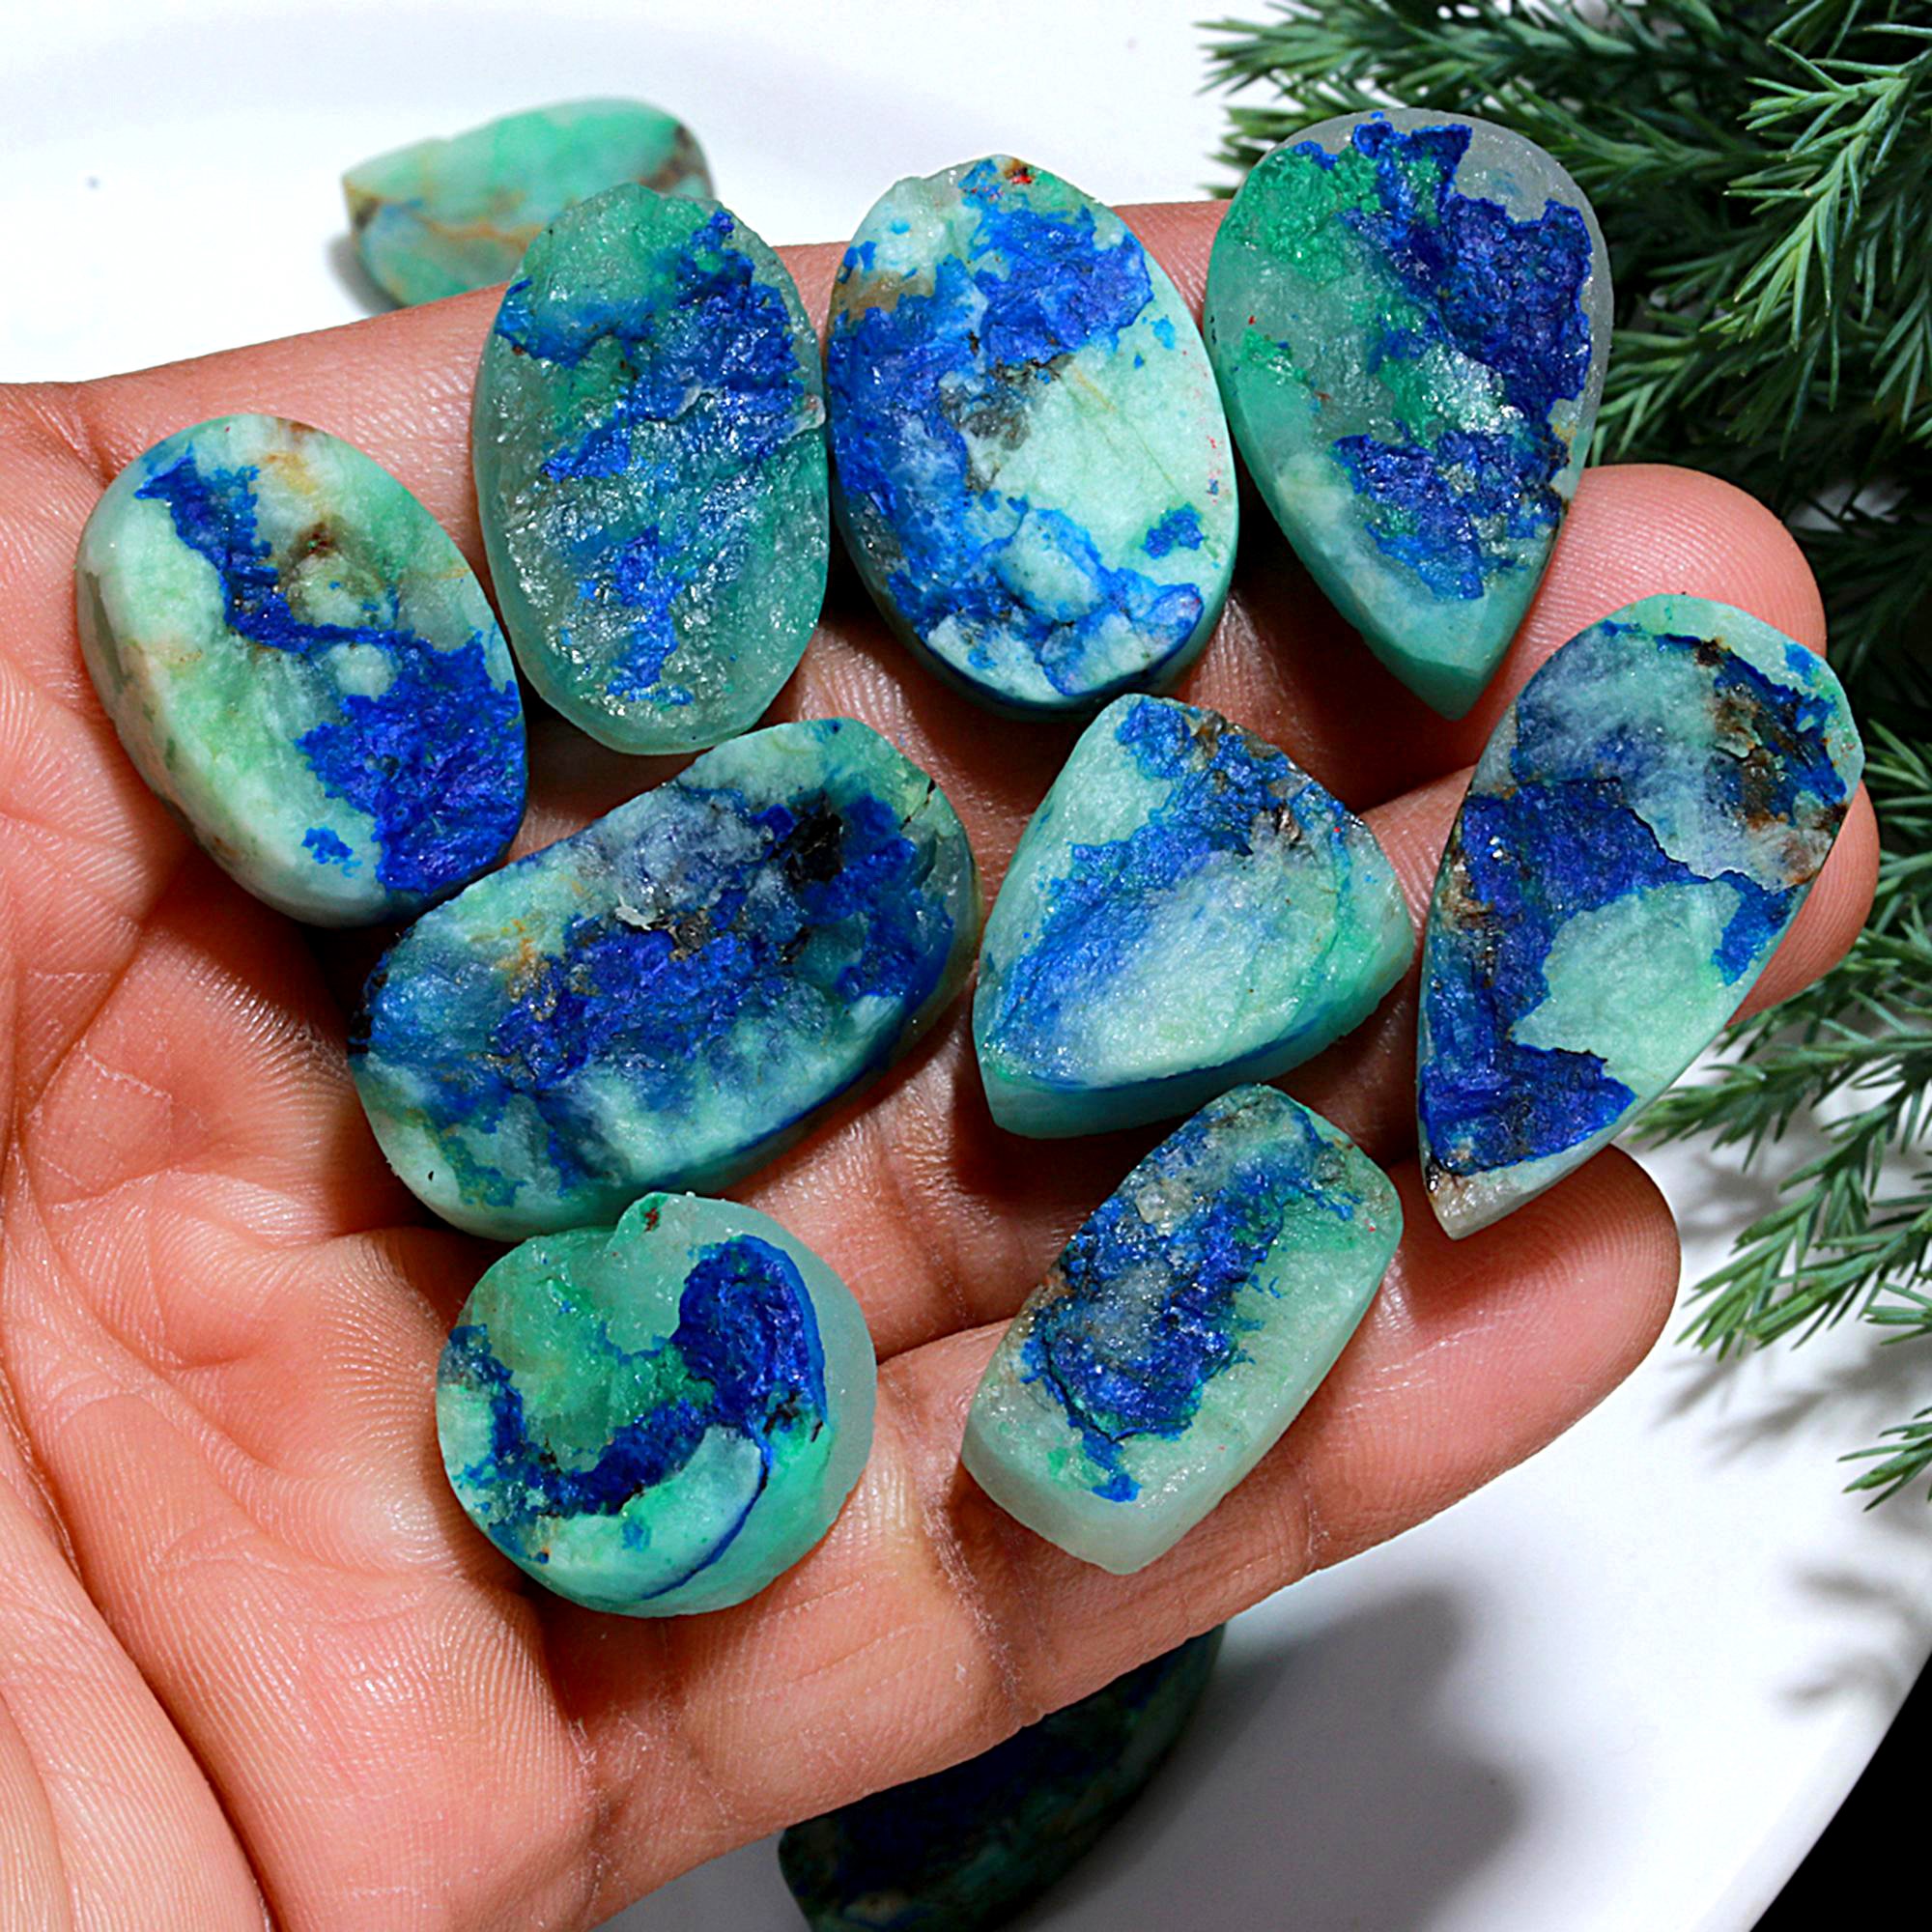 40 Pcs 570.Cts Natural Azurite Druzy Unpolished Loose Cabochon Gemstone For Jewelry Wholesale Lot Size 31x17 17x13mm#1178